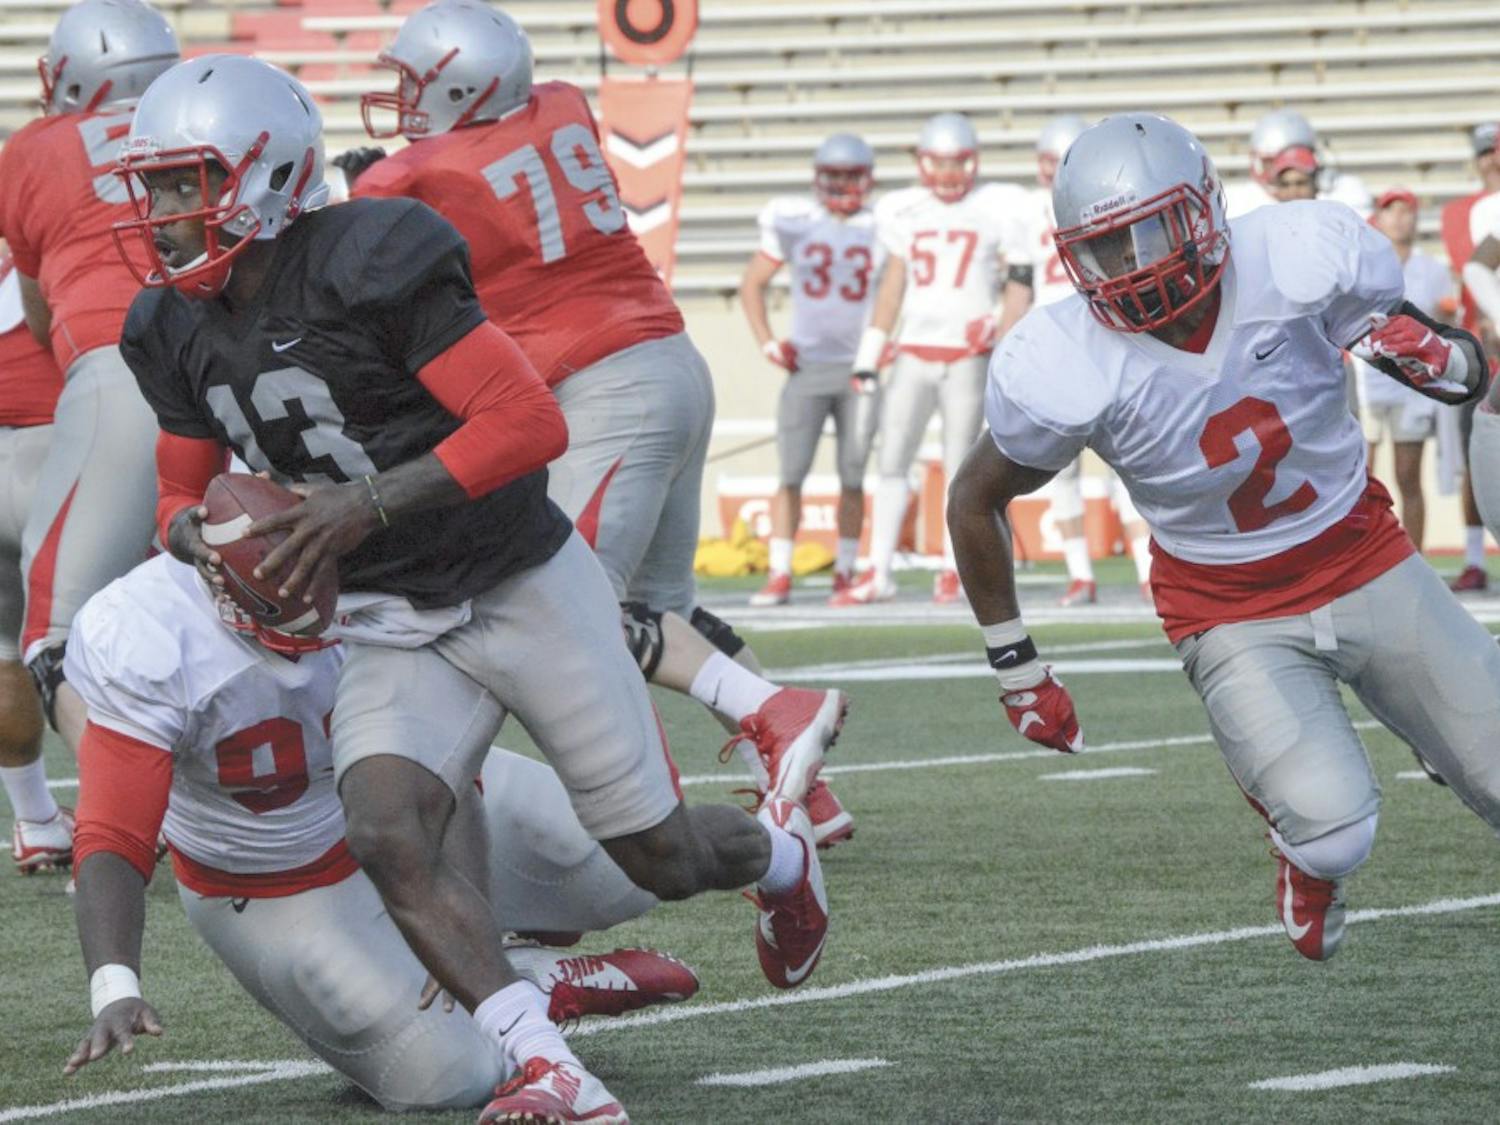 UNM redshirt sophomore quarterback Lamar Jordan runs the ball on Saturday evening. UNM’s first game will be against  Mississippi Valley State on Sept. 5 at University Stadium.